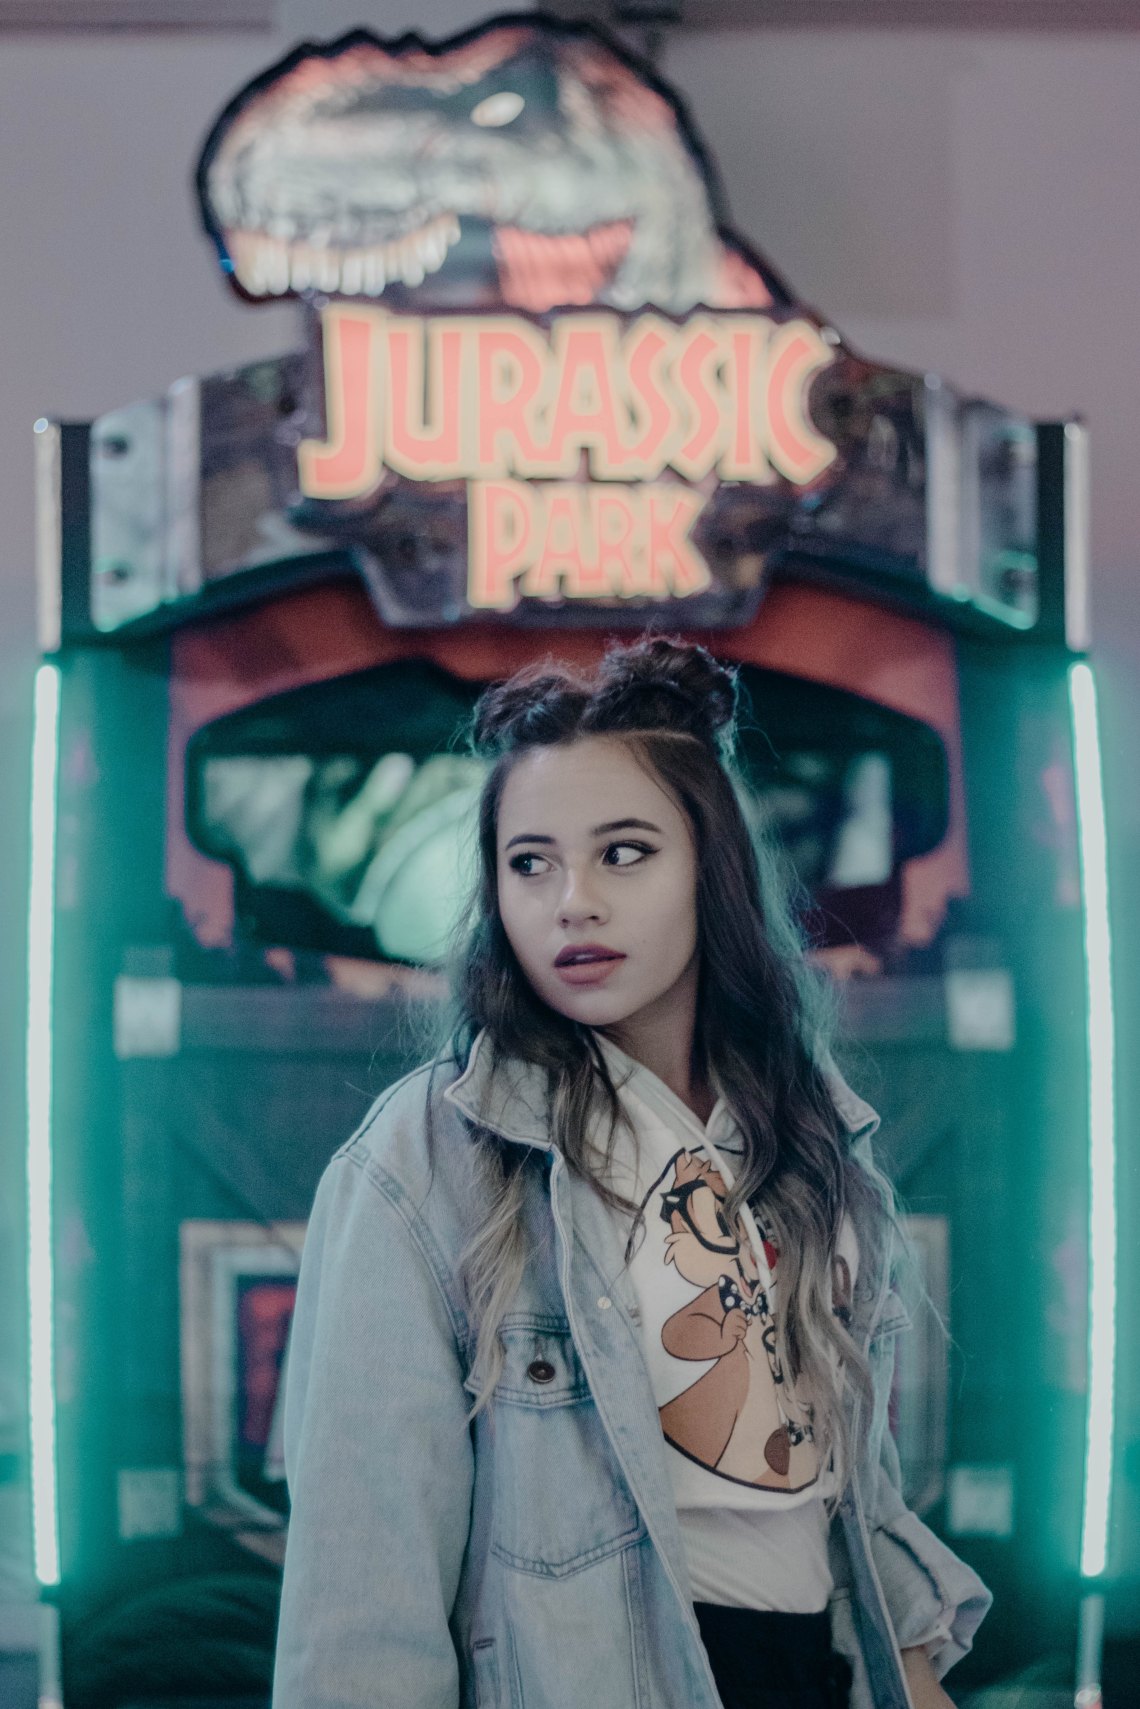 girl standing in front of a jurassic park sign 